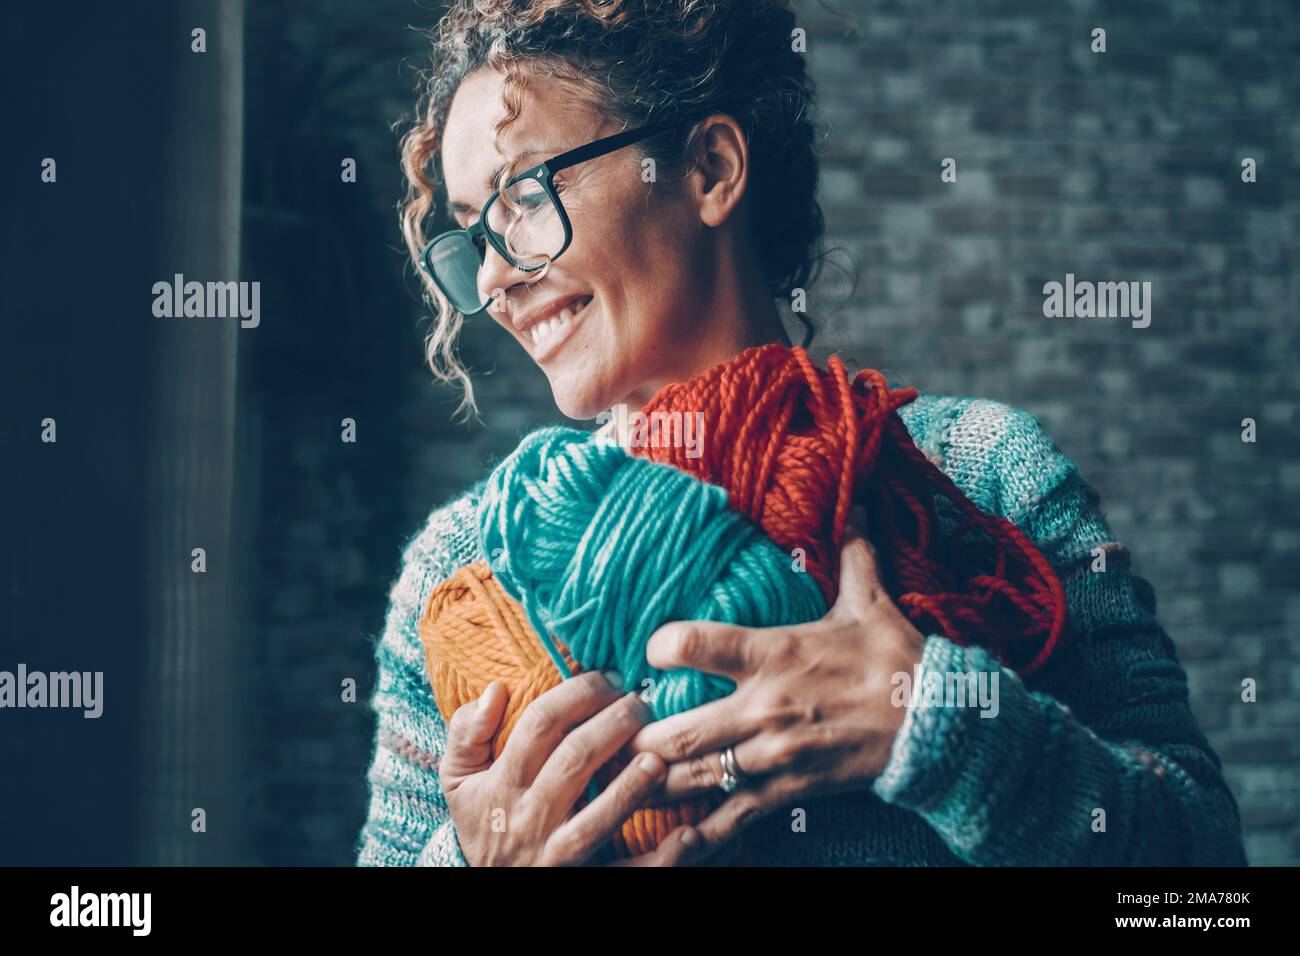 One woman with pleasure expression on face holding with love a bunch of wool balls in different color. Concept of indoor leisure activity and hobby. F Stock Photo